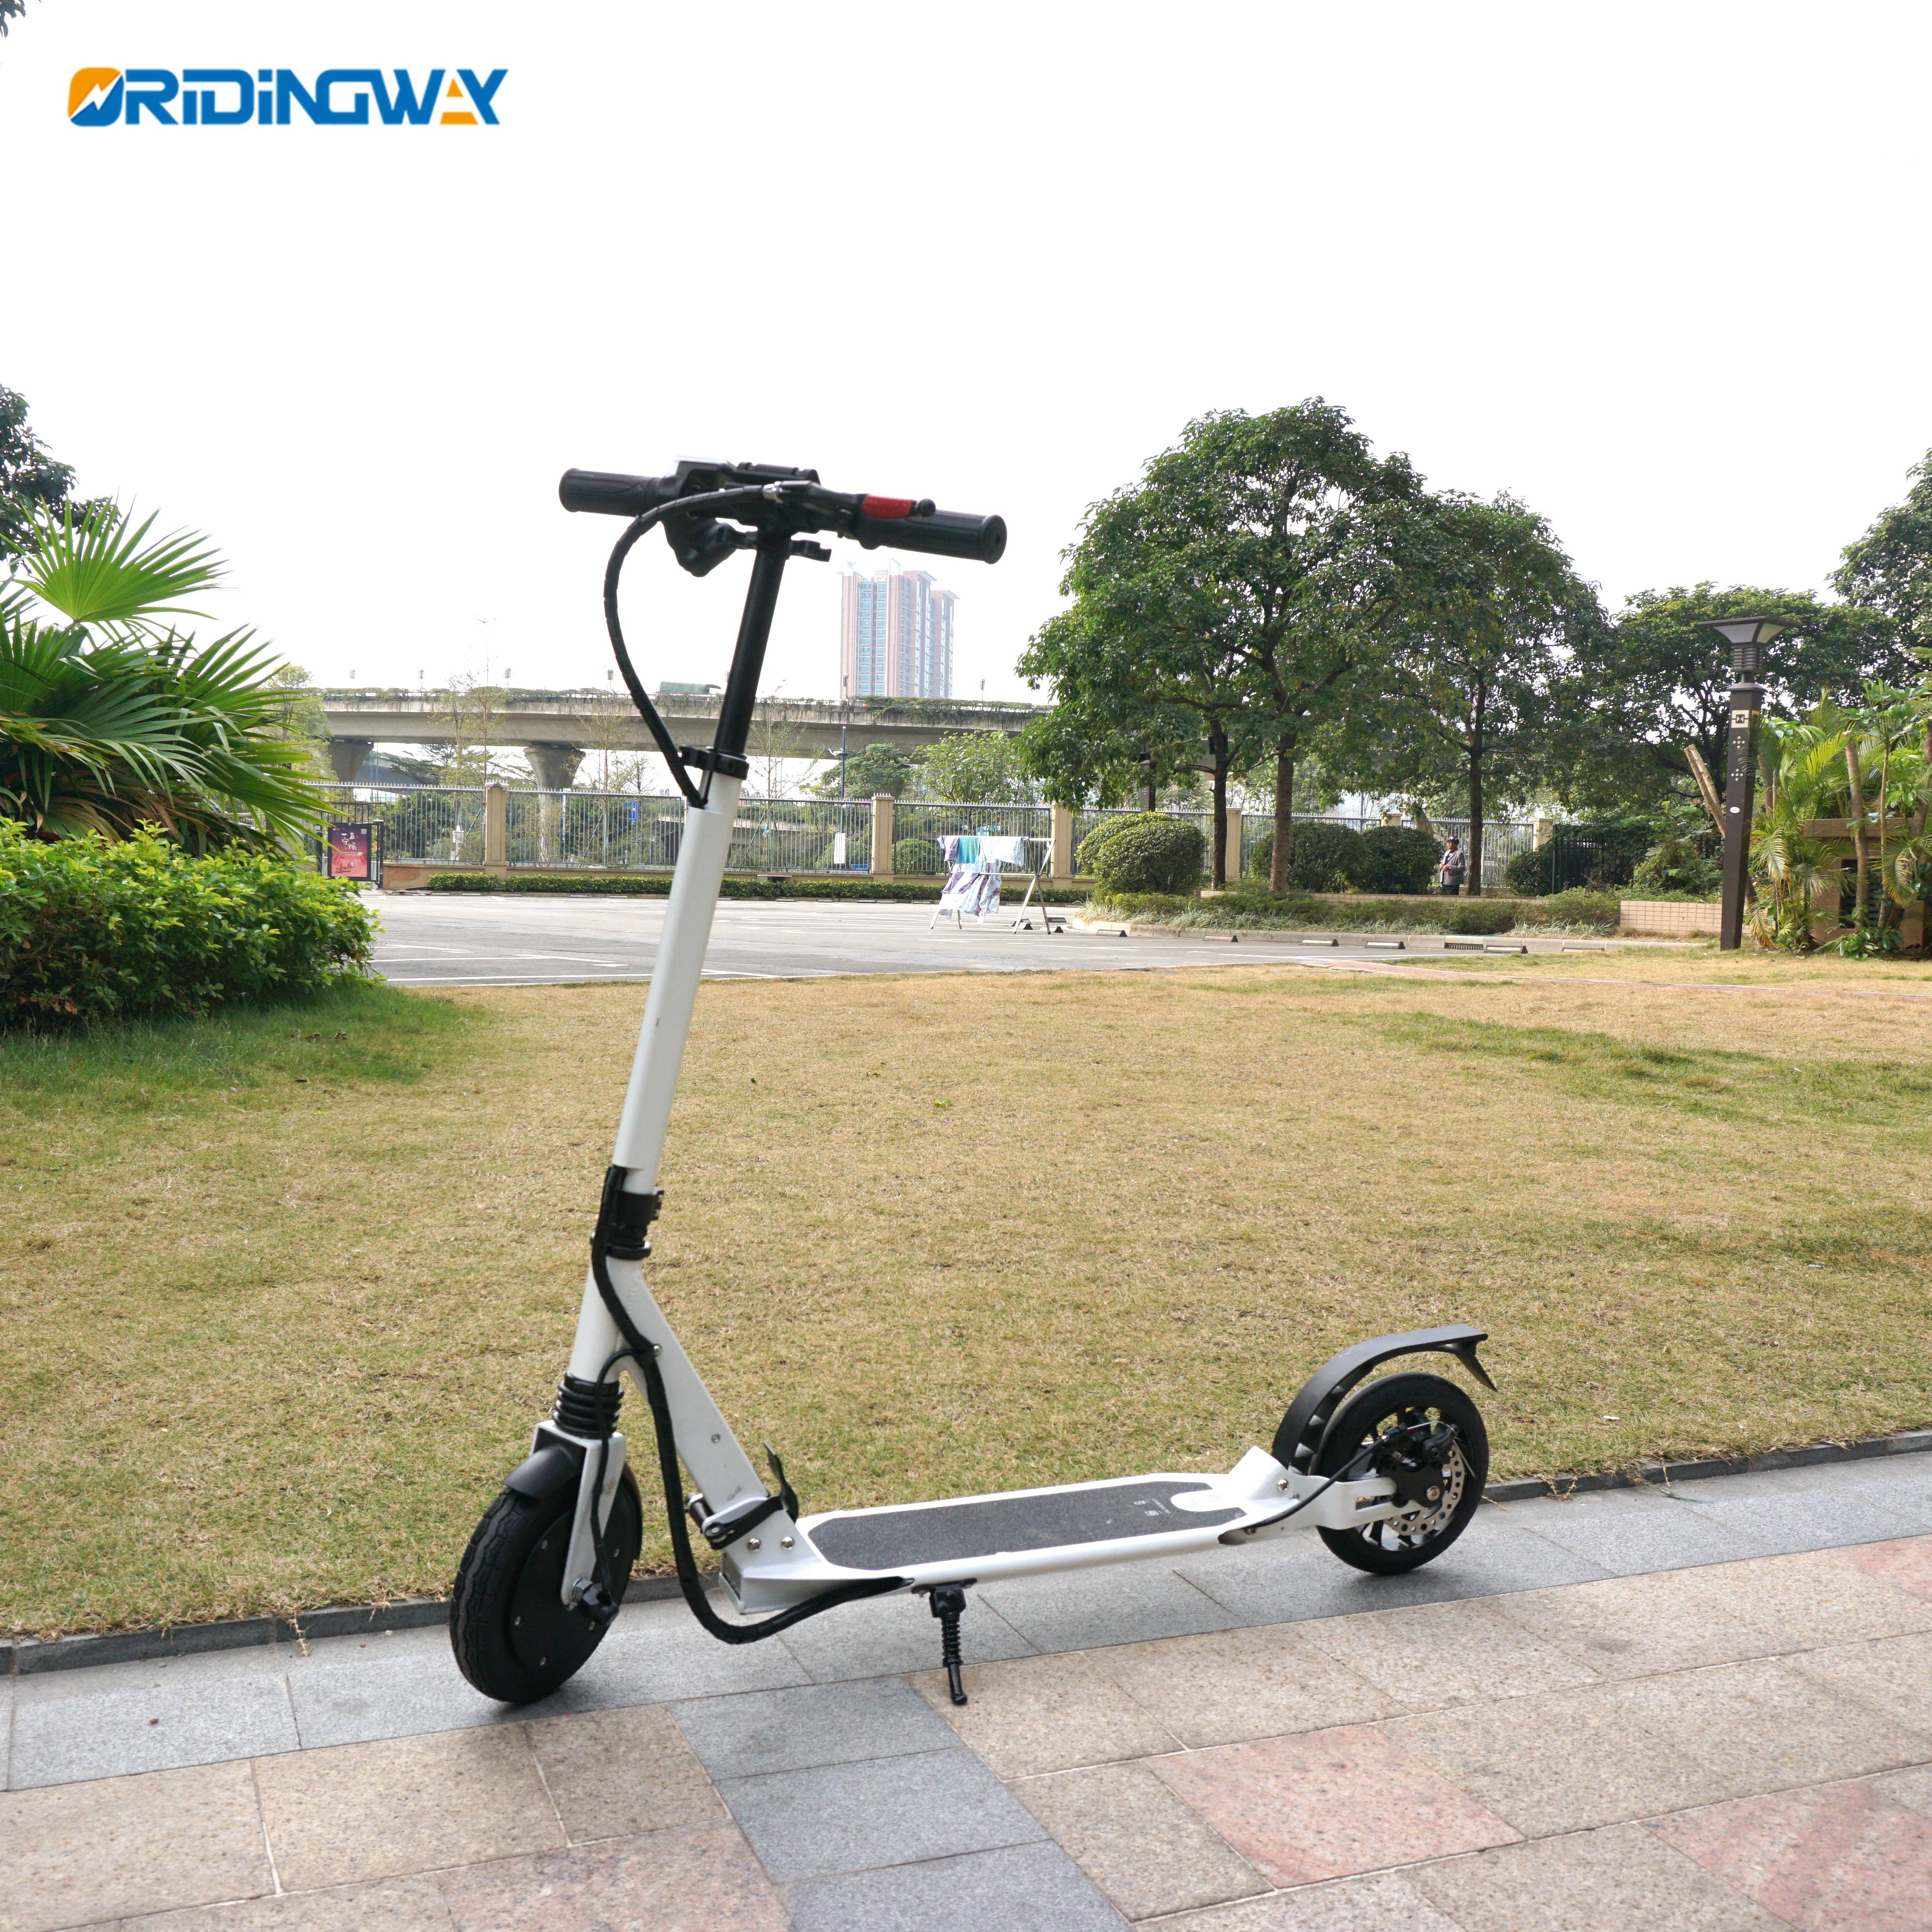 ORIDINGWAY two wheel electric scooter for kids